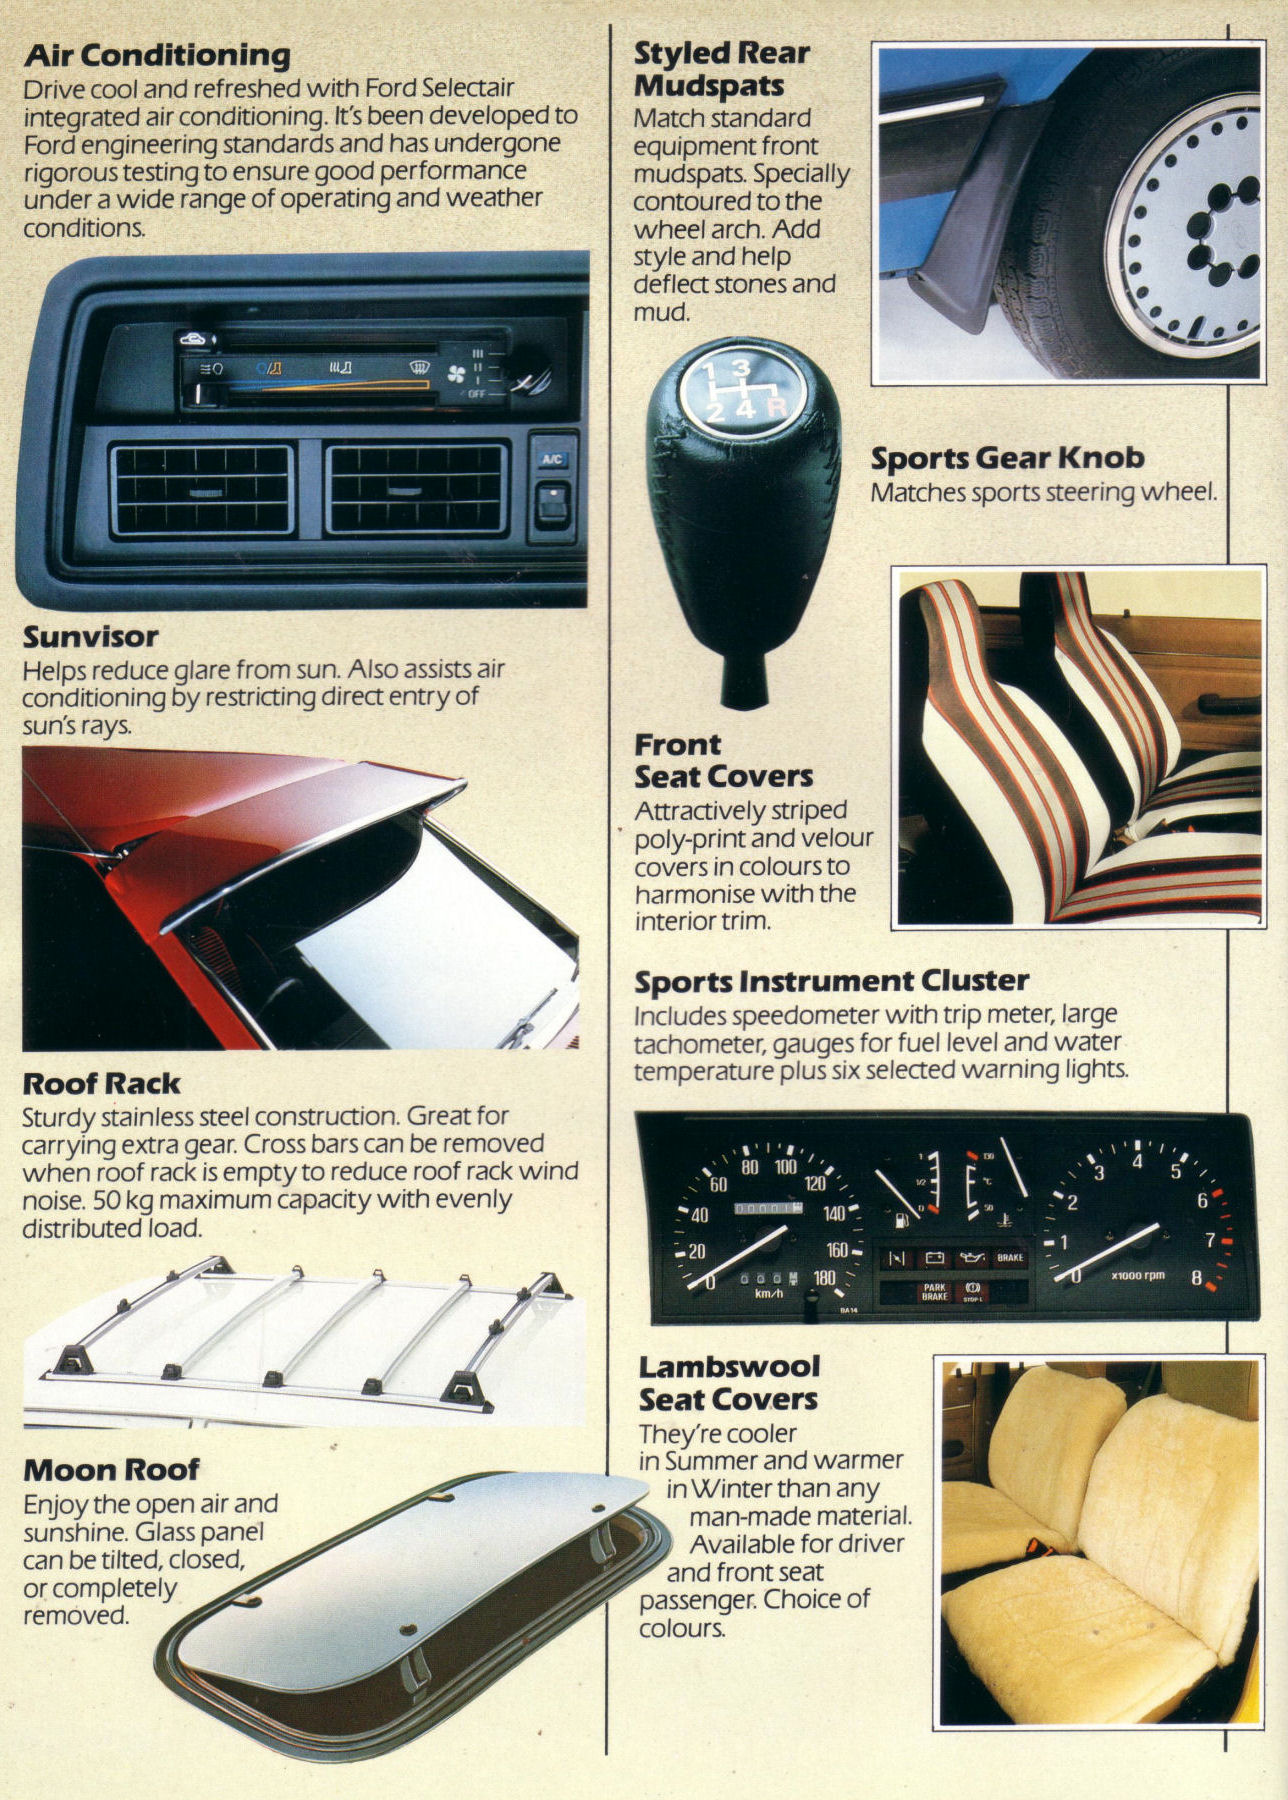 1983_Ford_GB_Meteor_Accessories-02